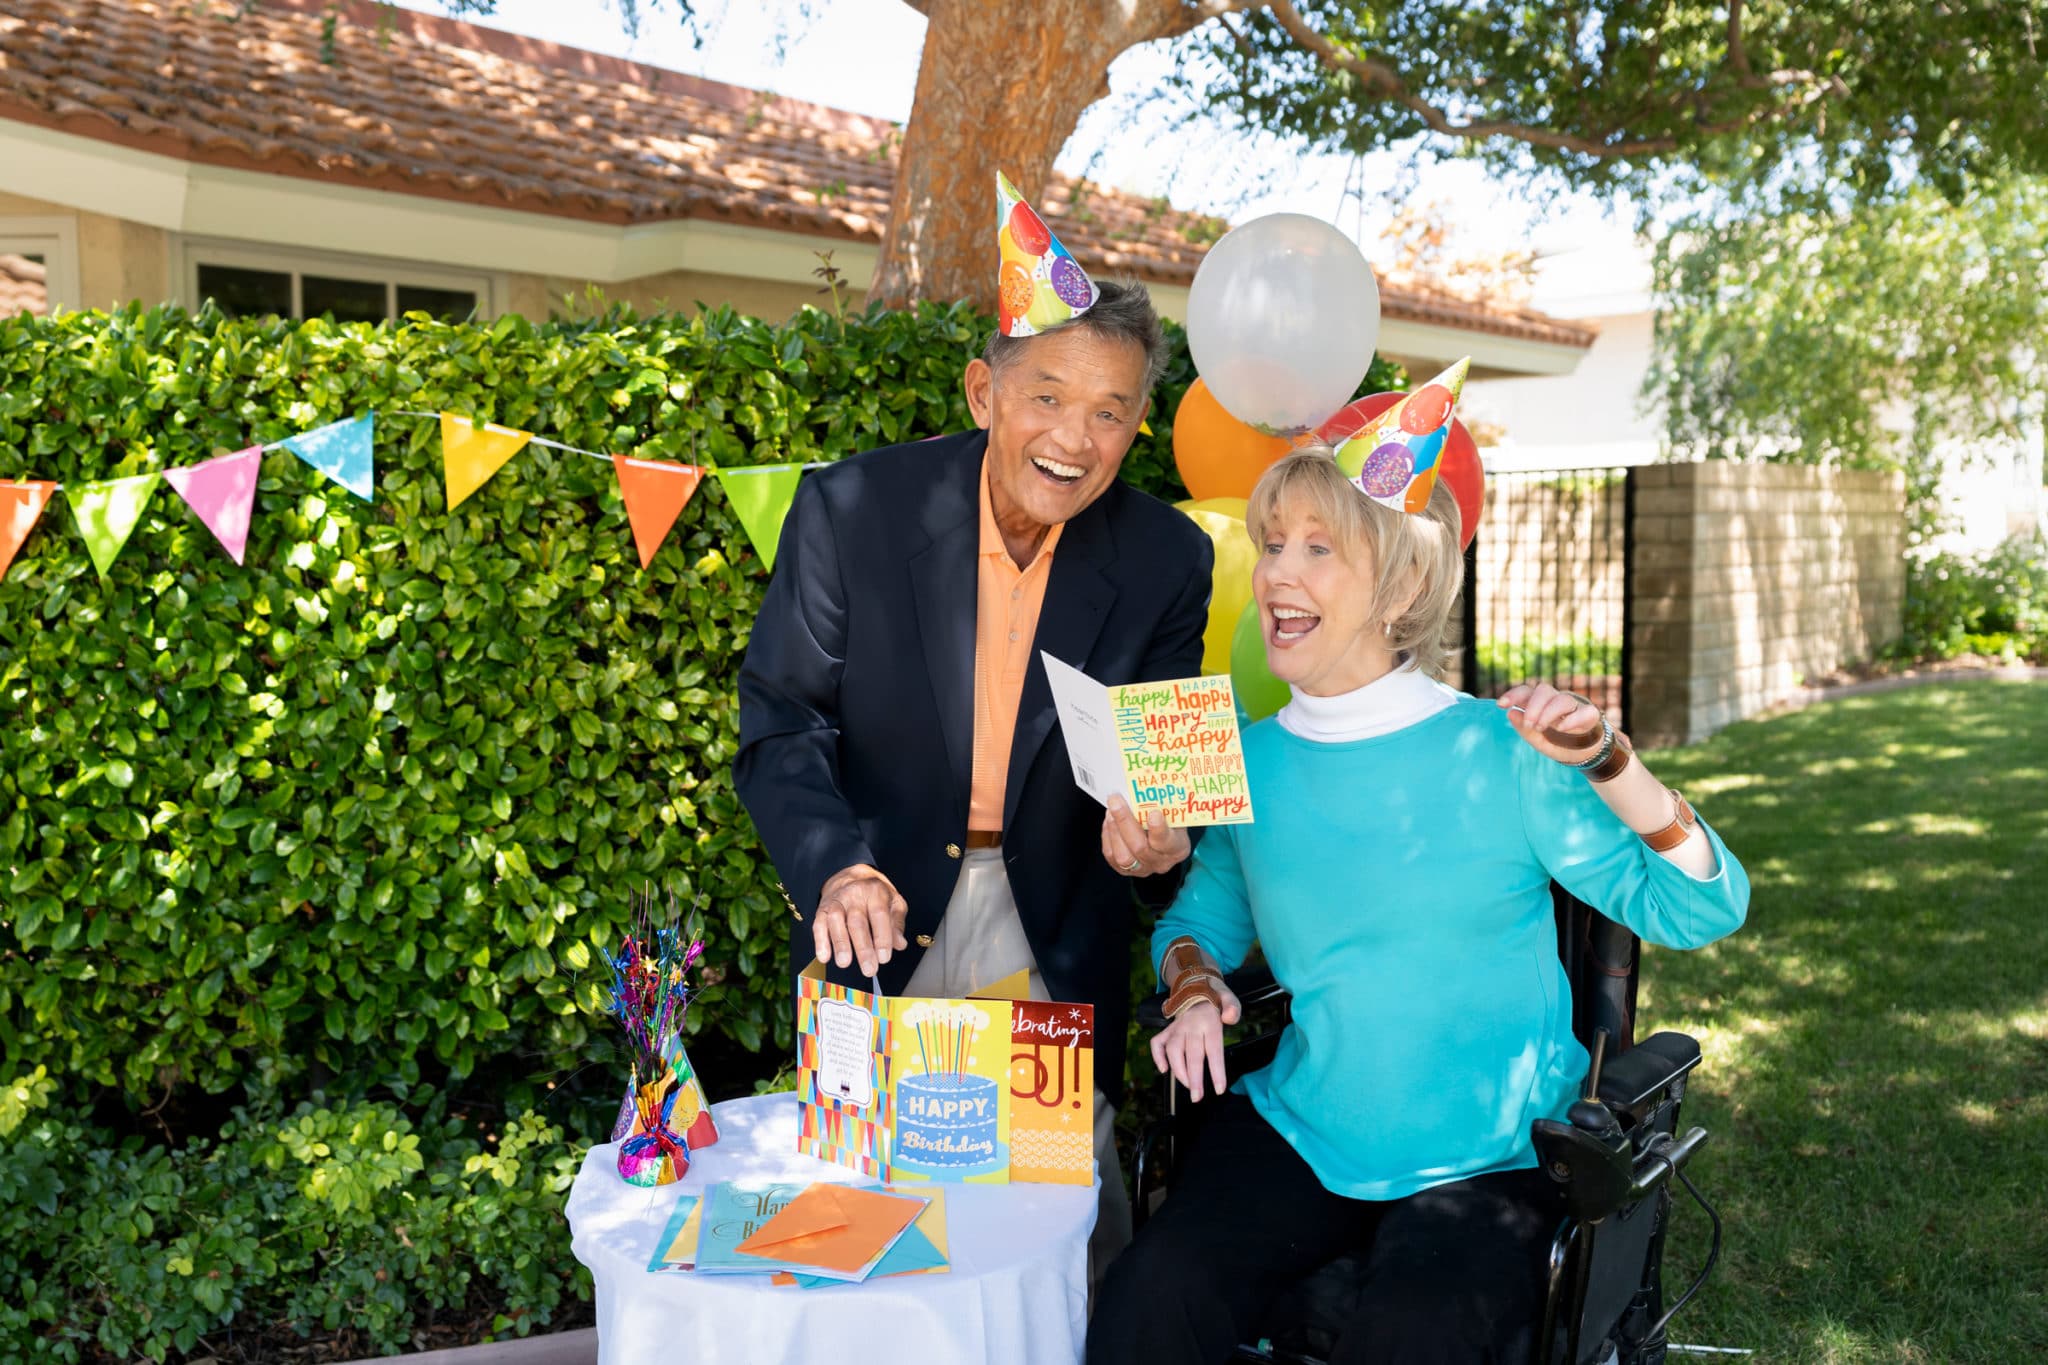 A scene of Ken standing next to Joni showing her a birthday card as they both smile wide, wearing party hats, surrounded by birthday decorations and balloons in what looks like a backyard.